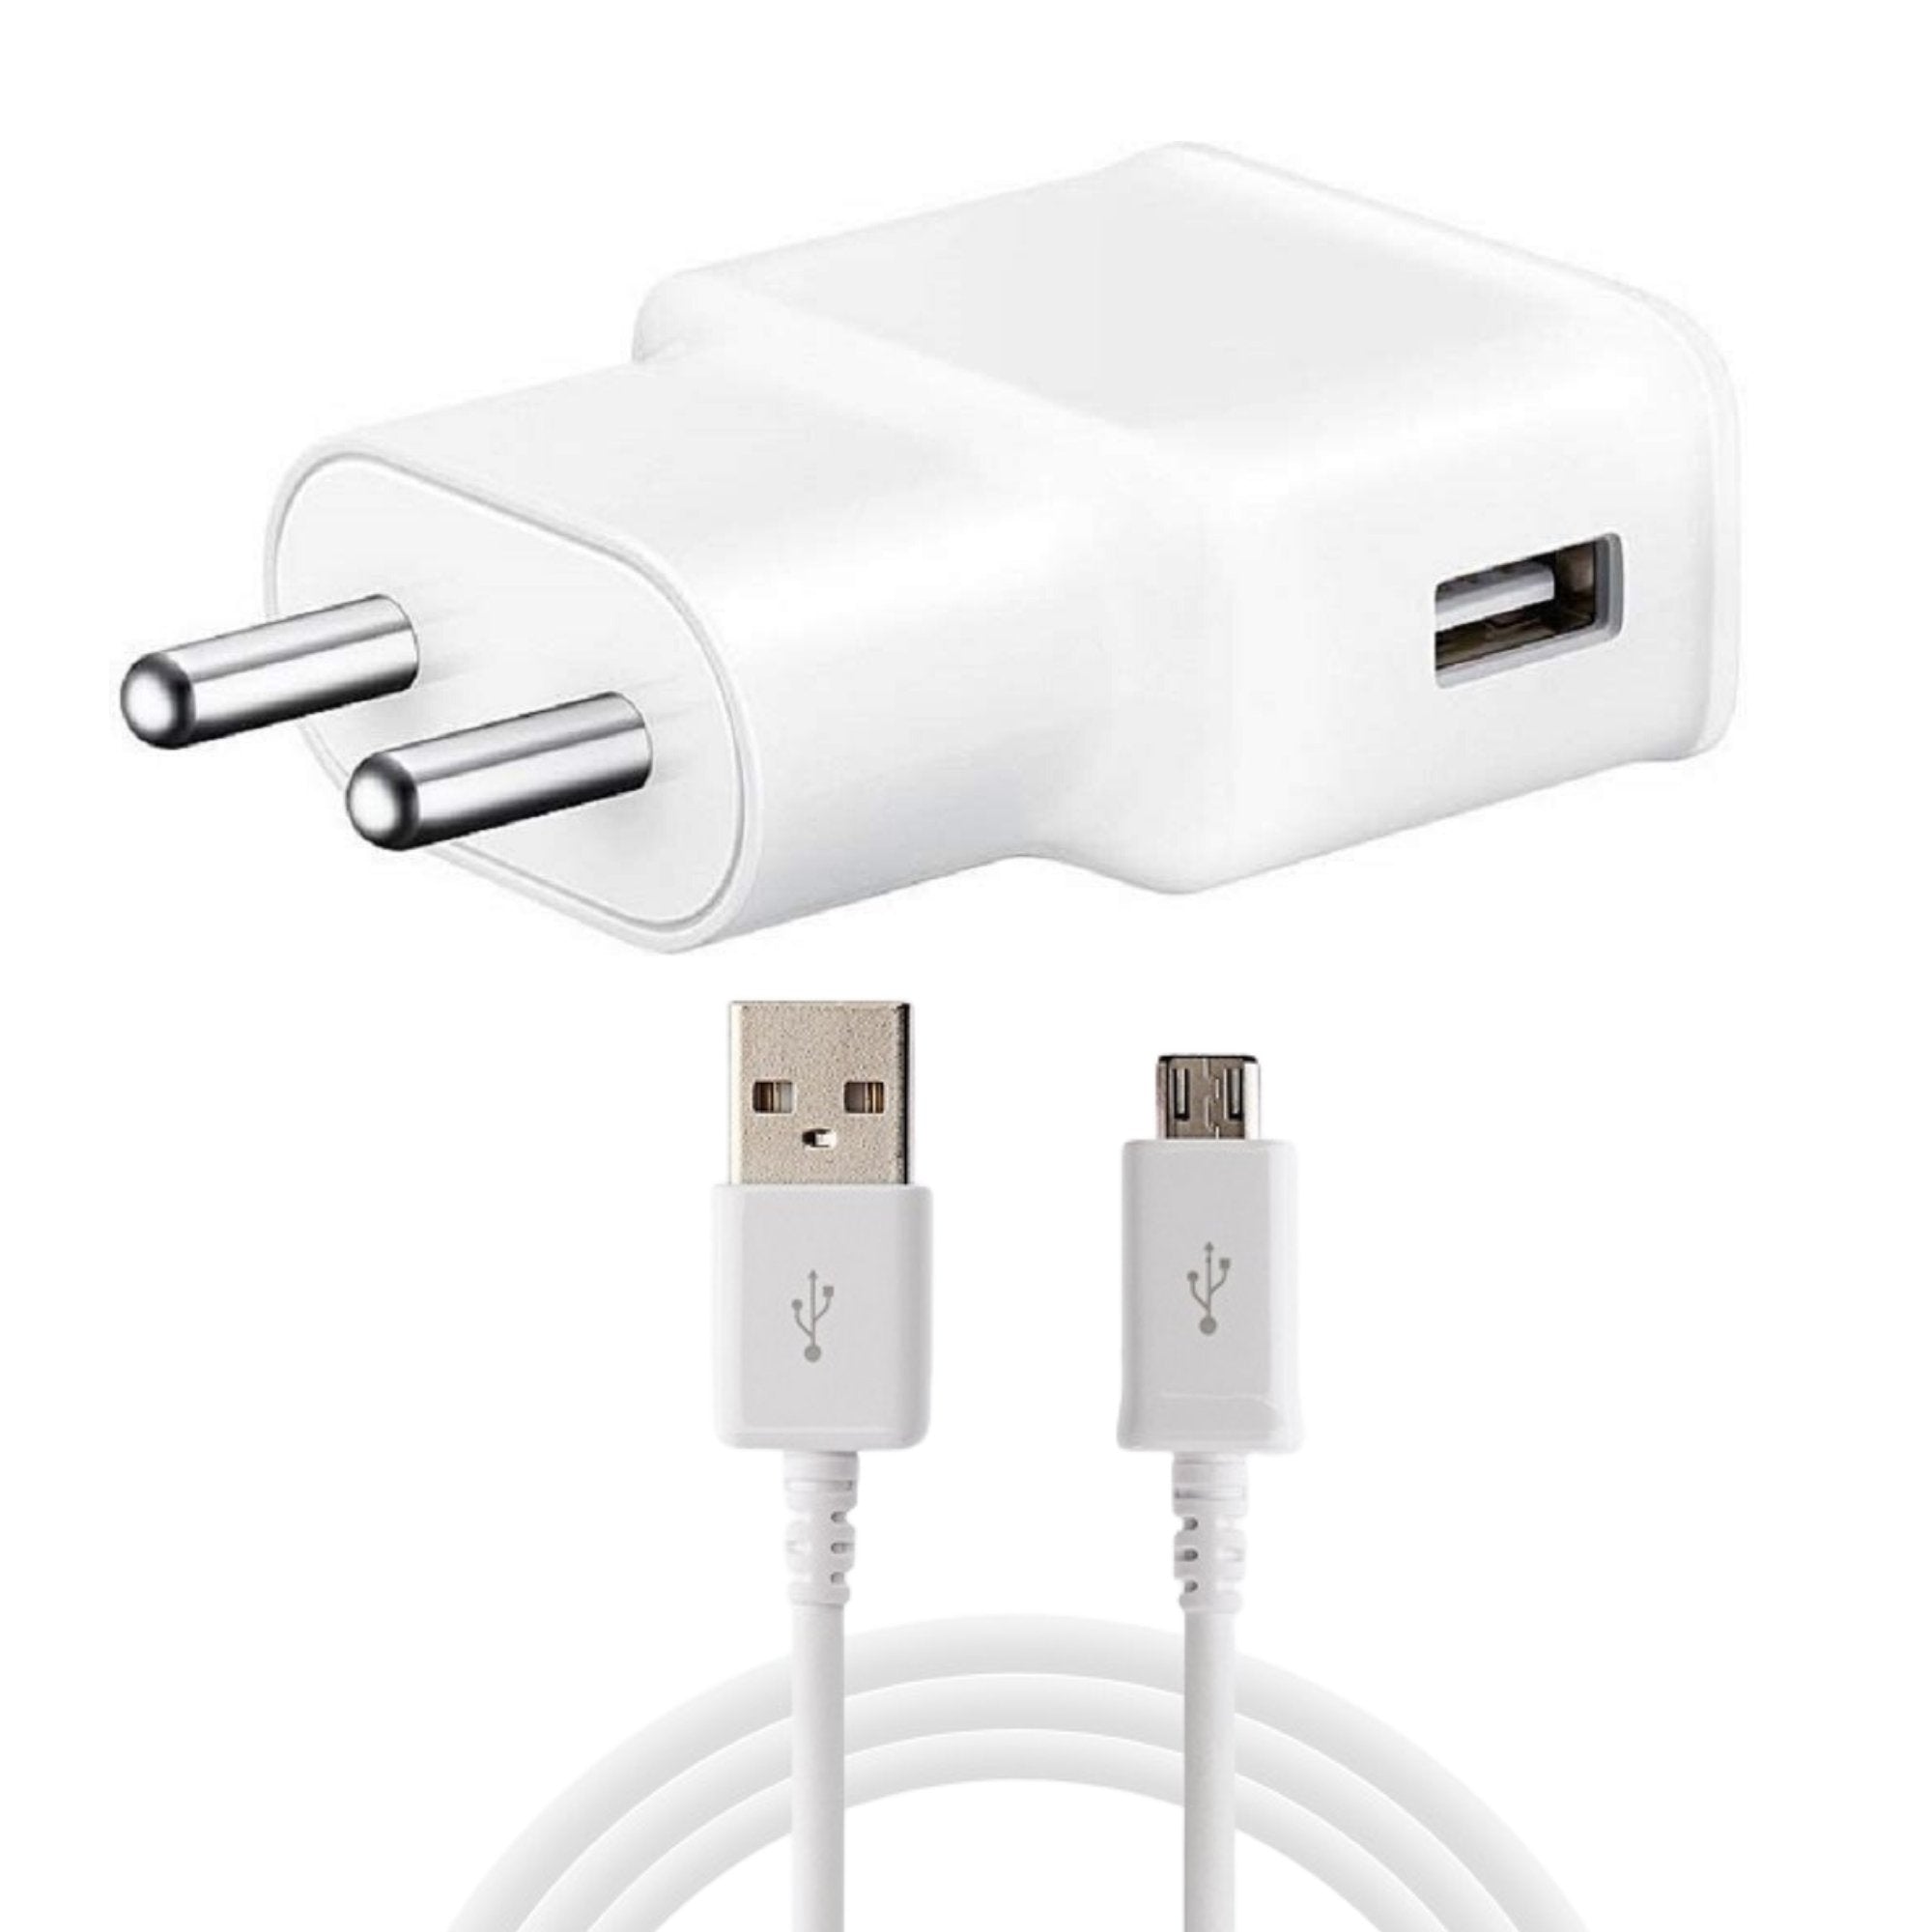 Samsung J8 Plus Adaptive Mobile Charger 2 Amp With Adaptive Fast Cable White-chargingcable.in